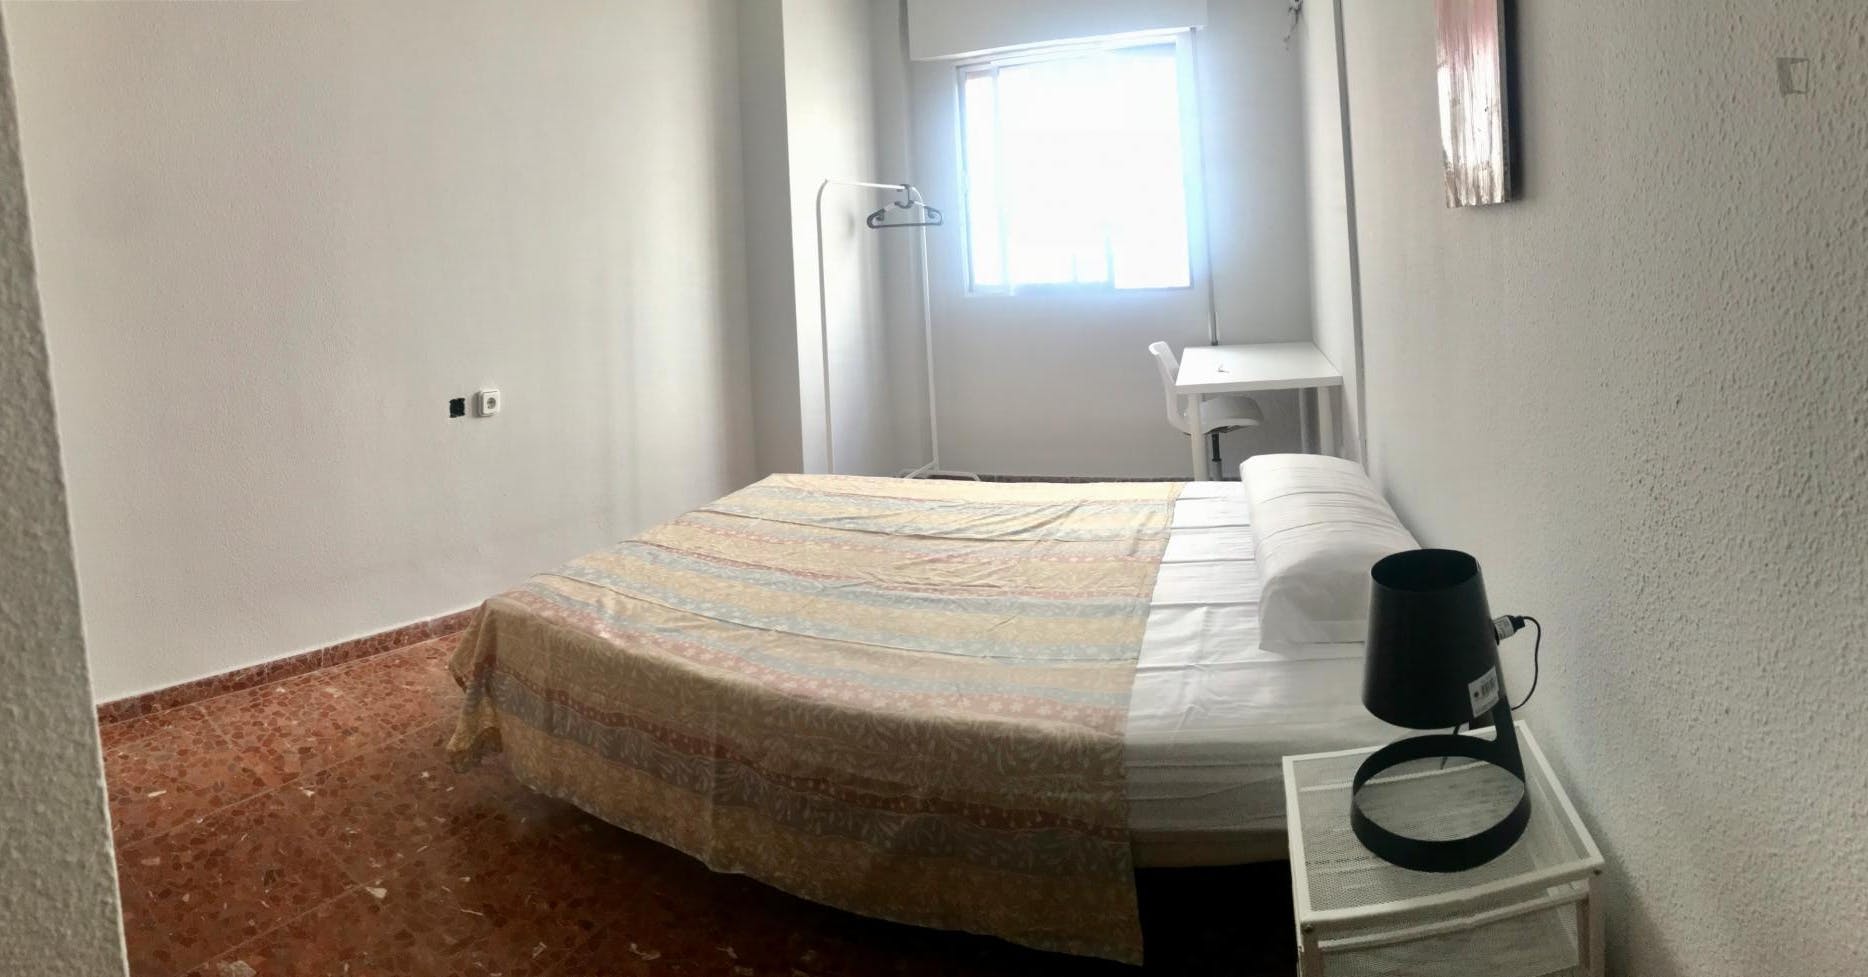 Admirable double bedroom in the centre of Cordoba